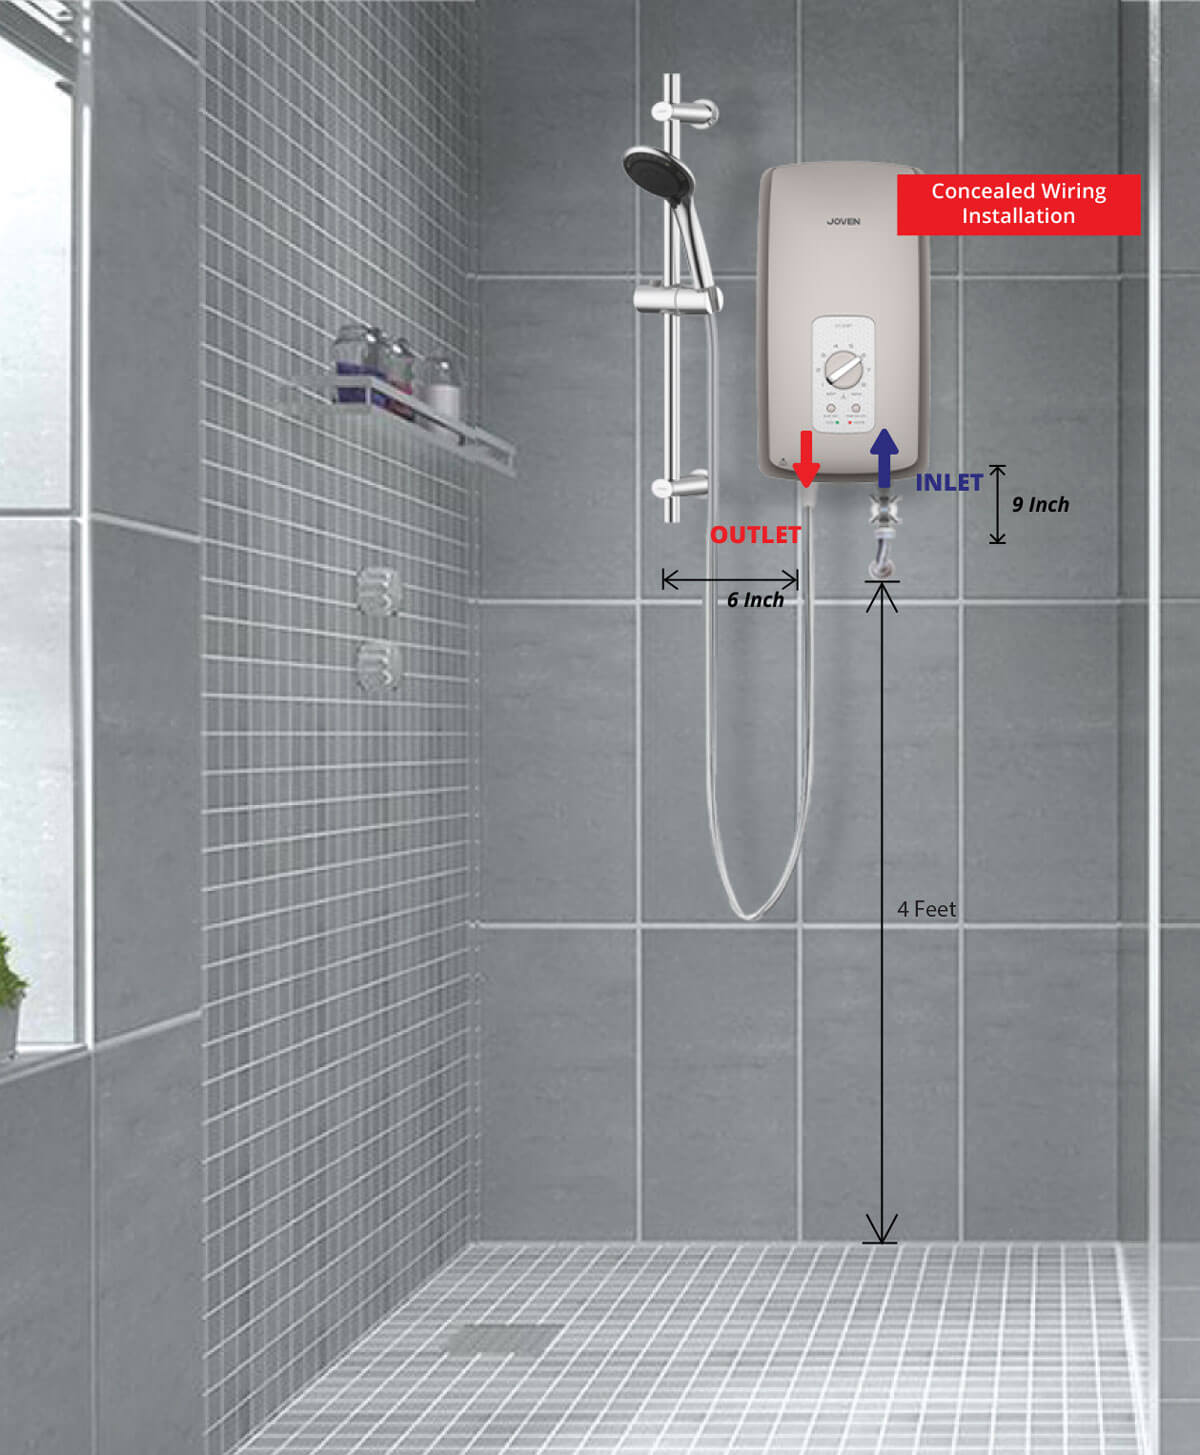 Sample Guideline for Instant-Water Heater Installation